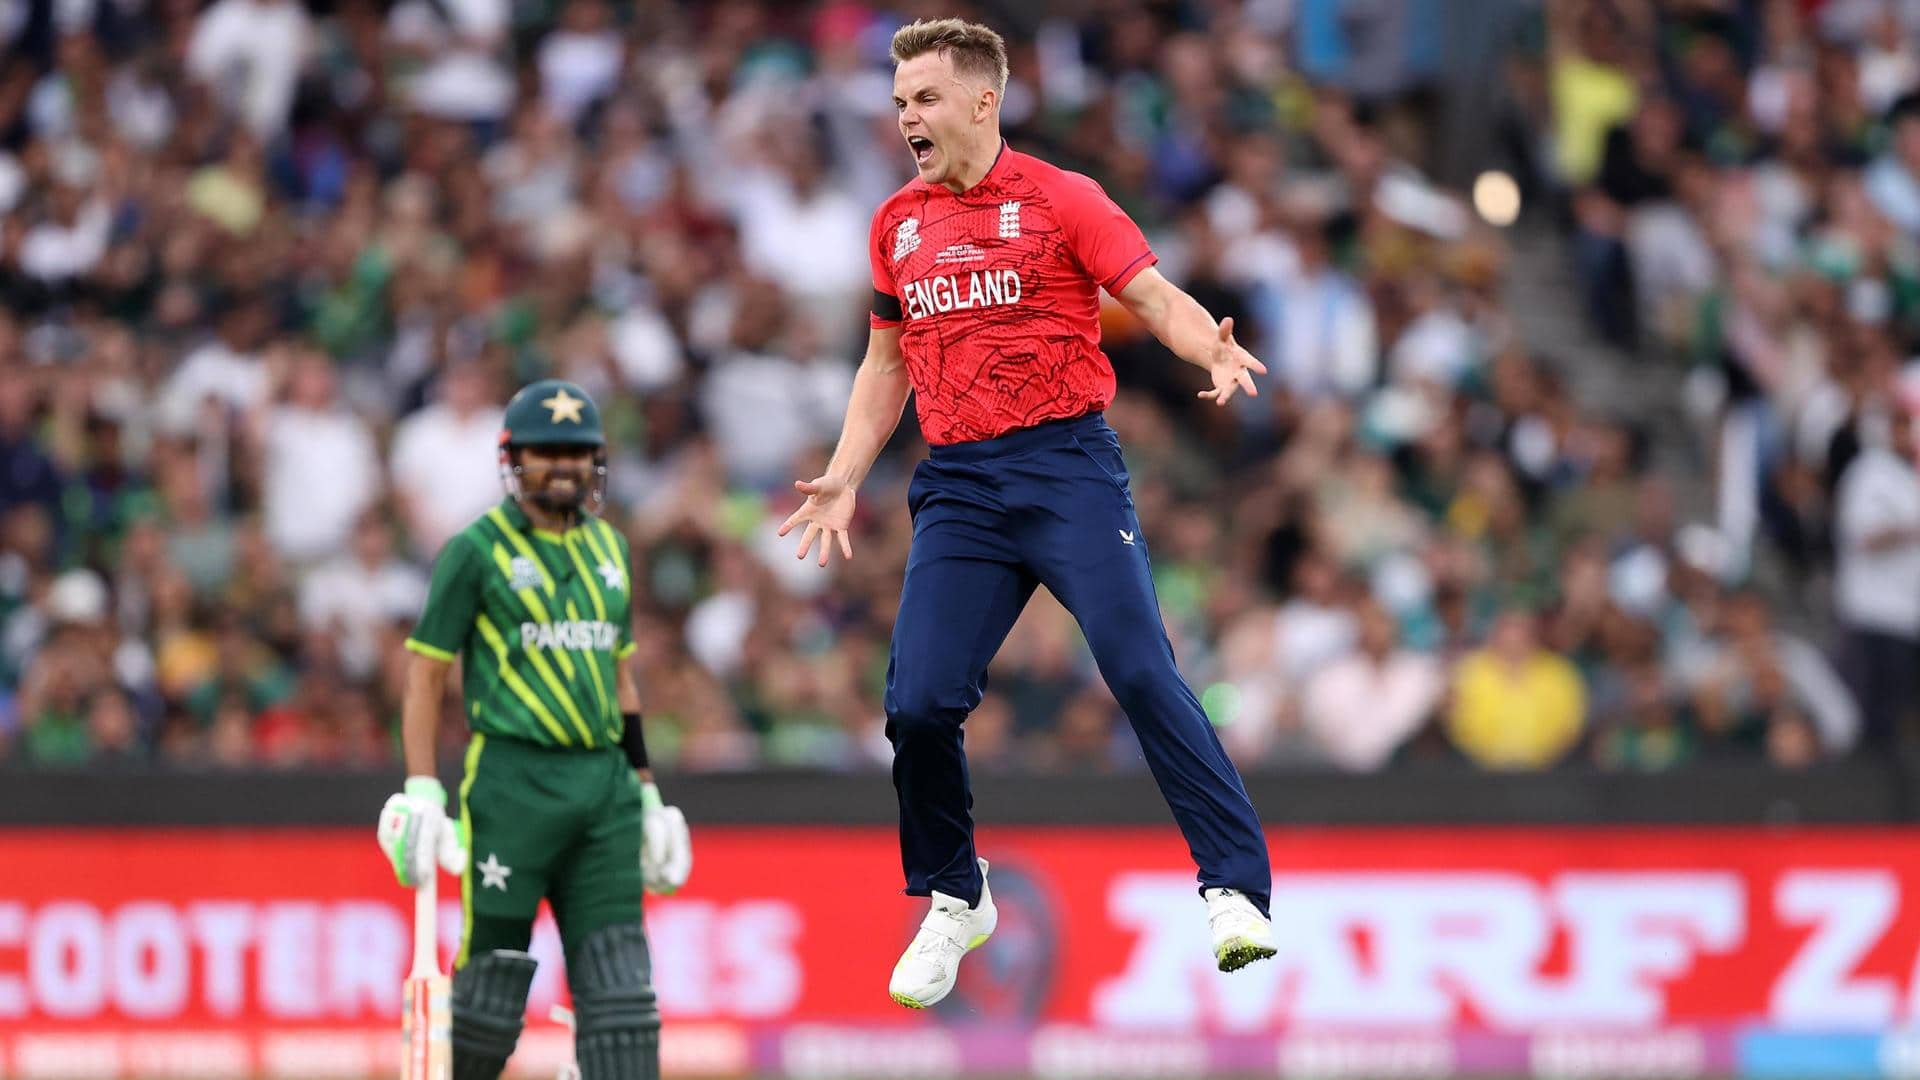 2022 T20 WC: Sam Curran adjudged Player of the Tournament